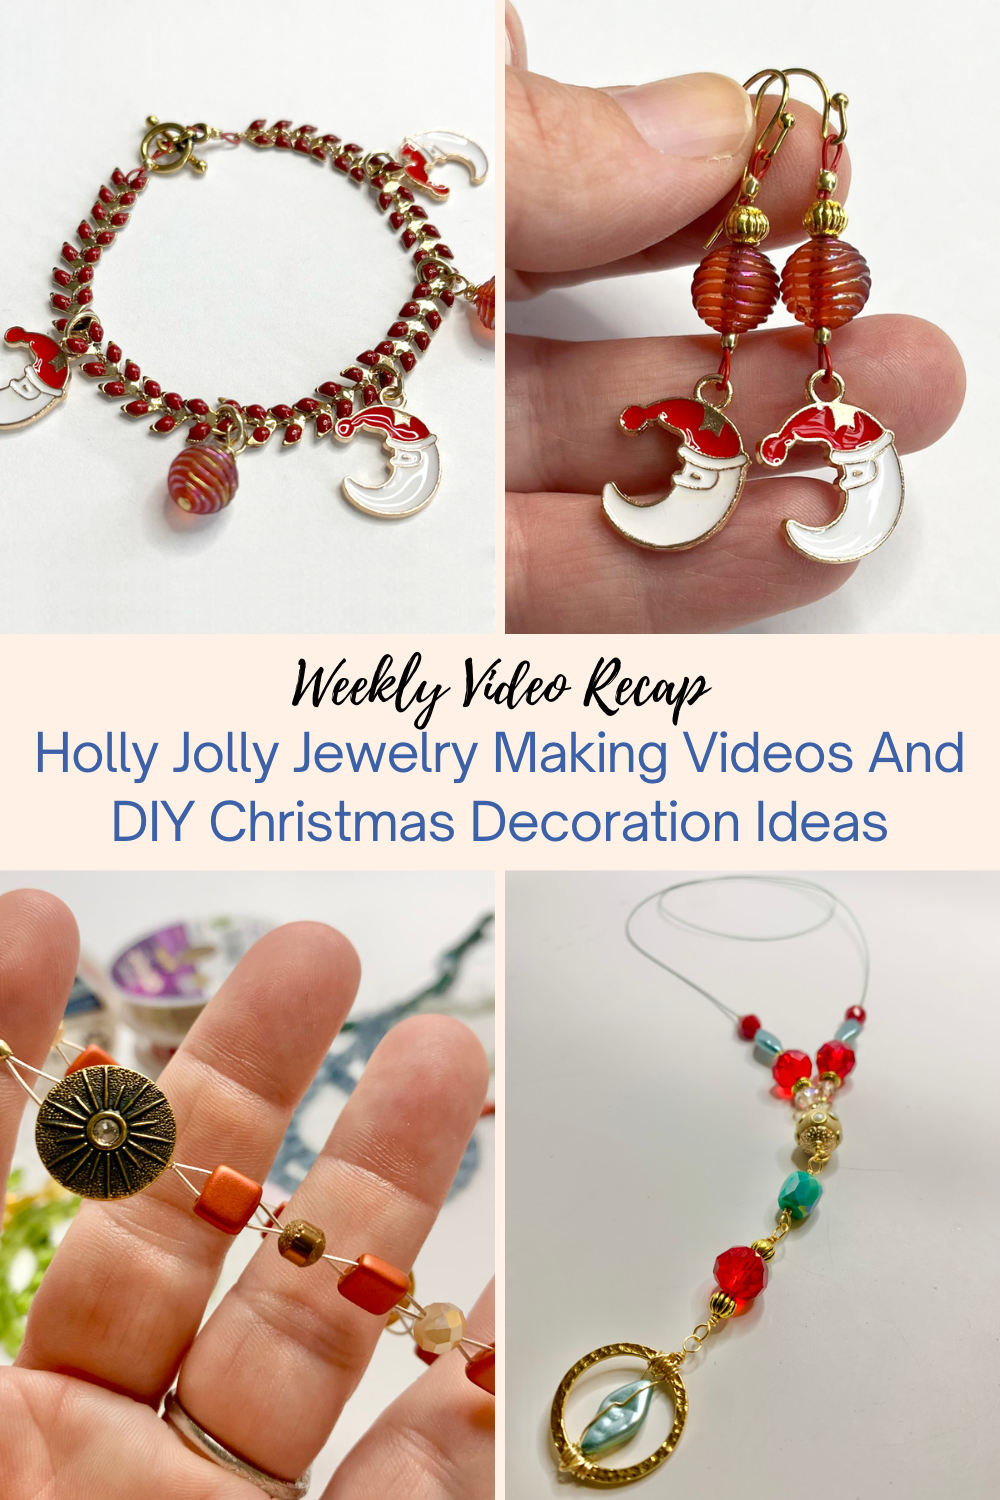 Holly Jolly Jewelry Making Videos And DIY Christmas Decoration Ideas Collage